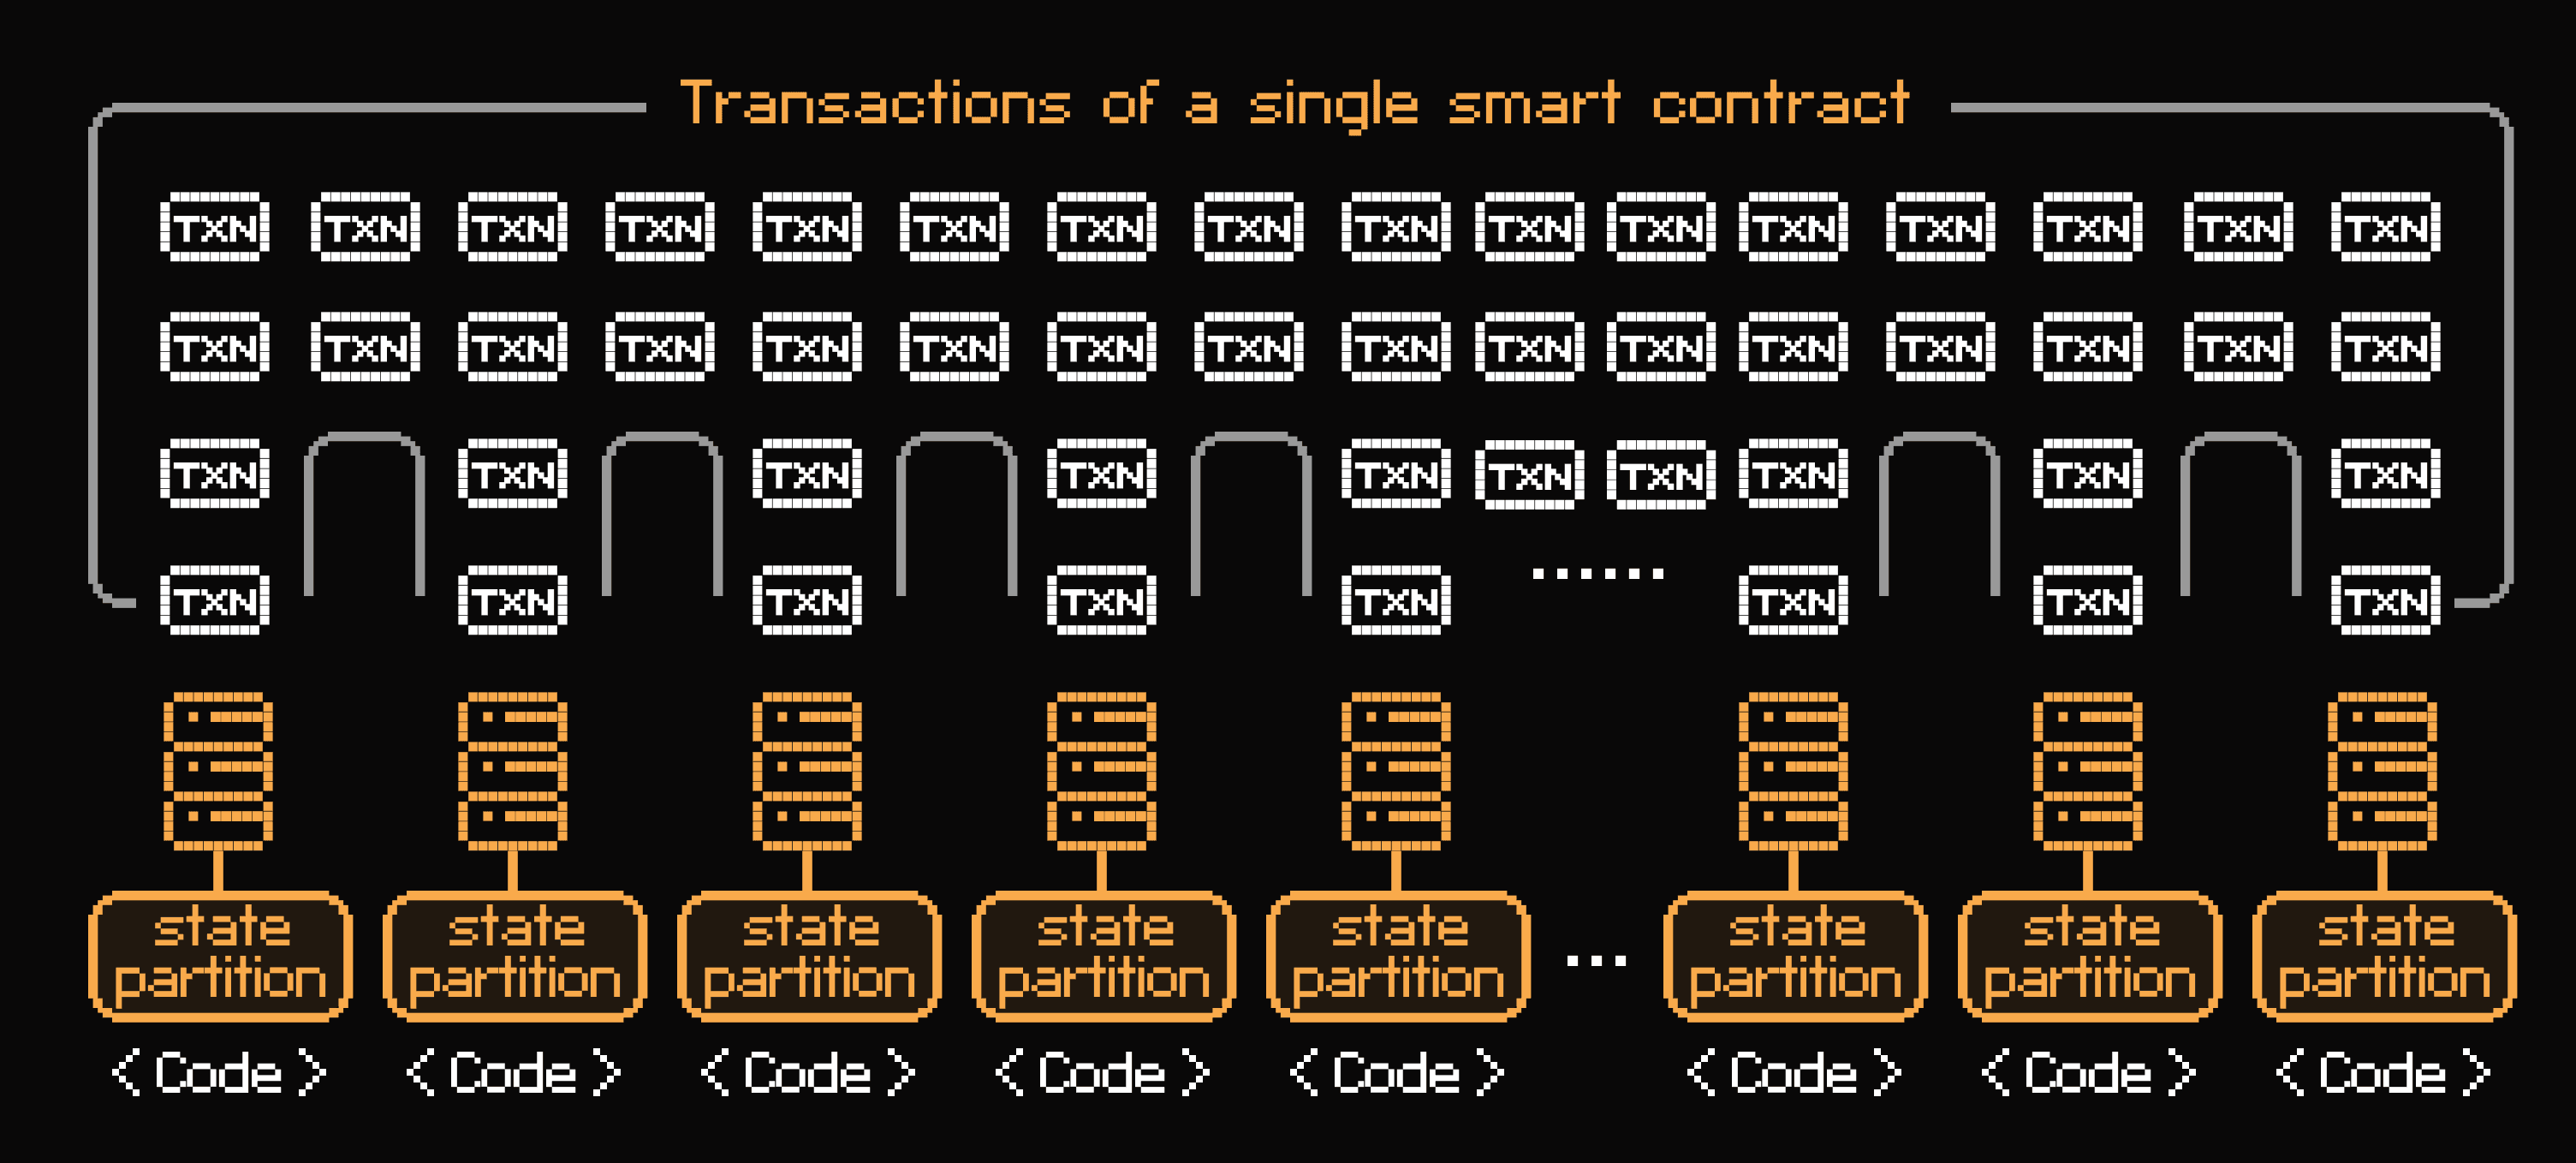 Transactions of a single smart contract